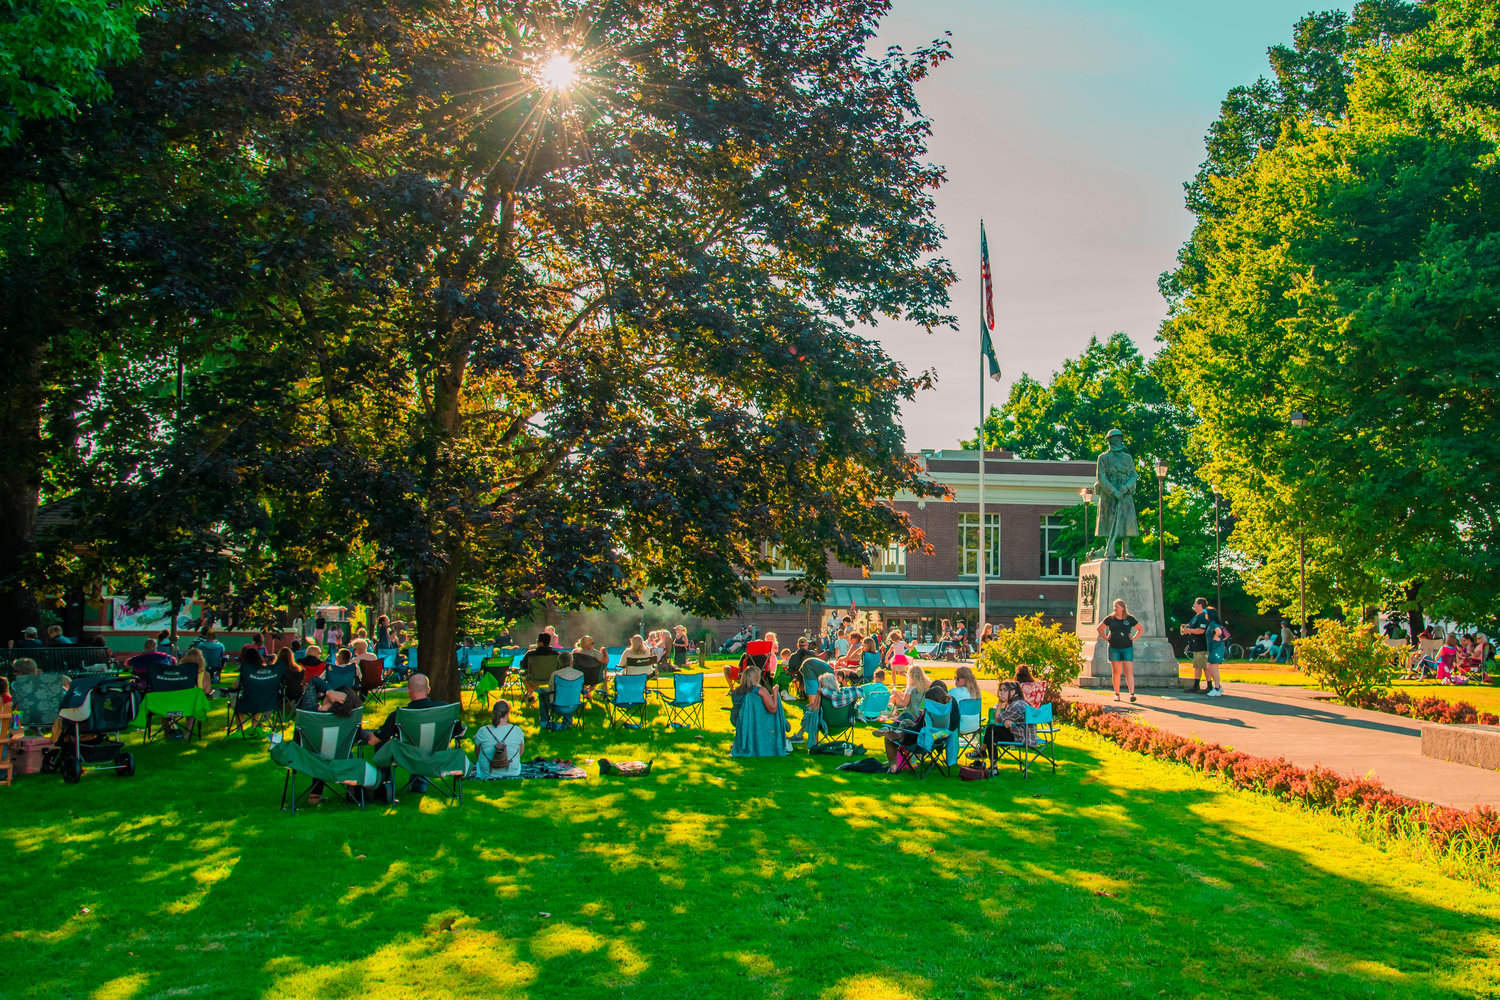 Sun shines through trees over George Washington Park in Centralia as community members gather during a “Music in the Park” event on Saturday.